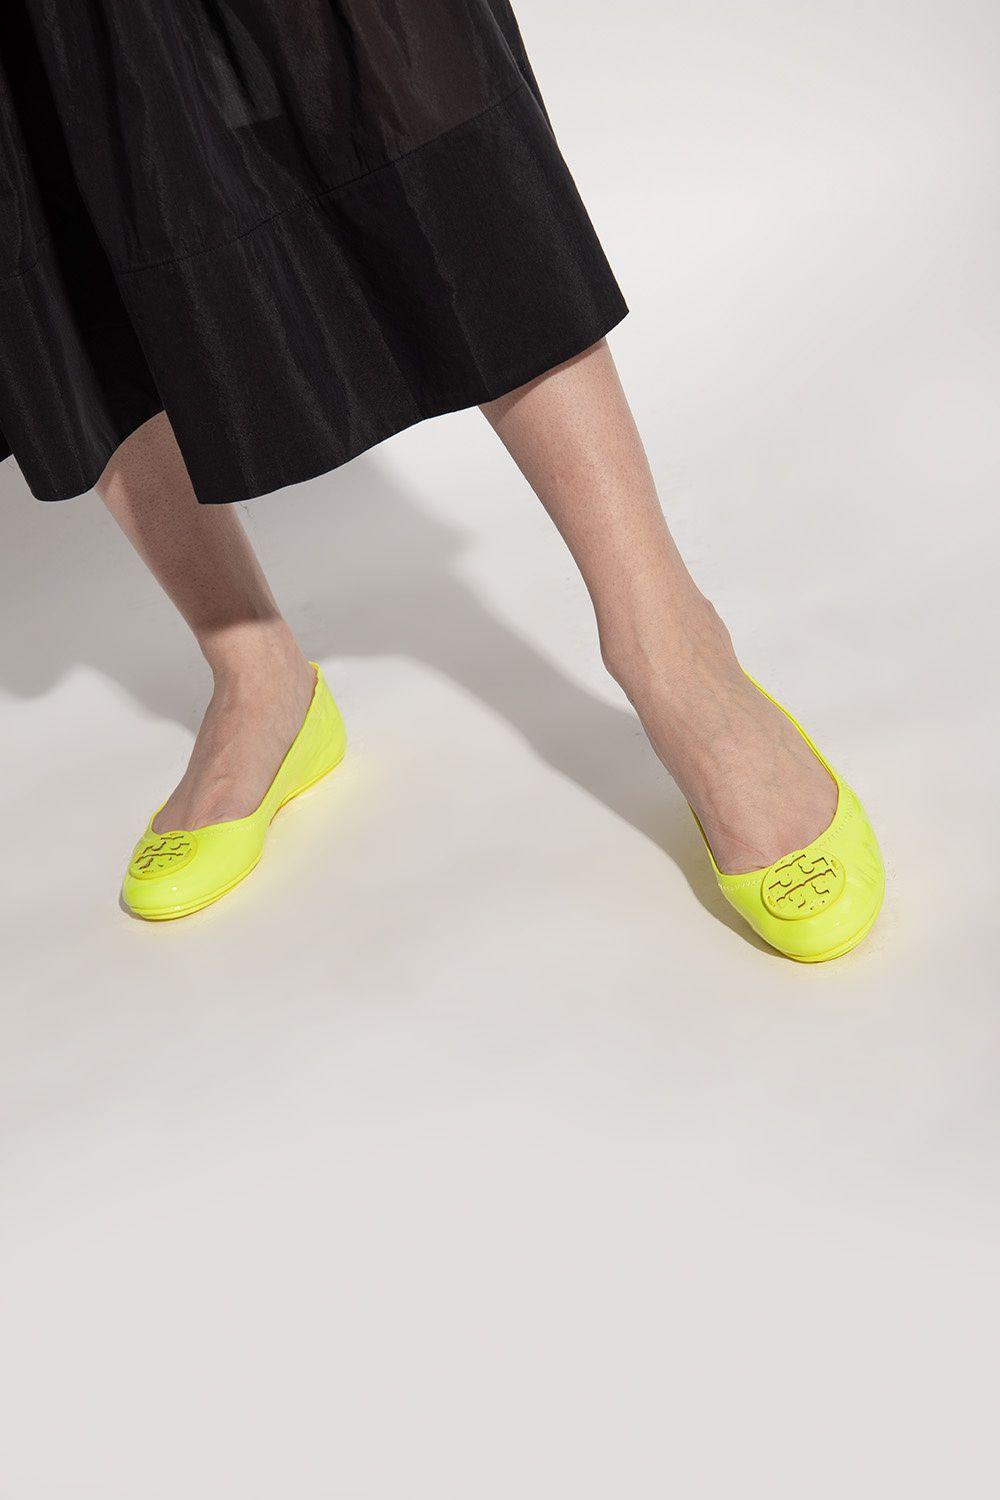 Tory Burch 'minnie' Ballet Flats in Yellow | Lyst